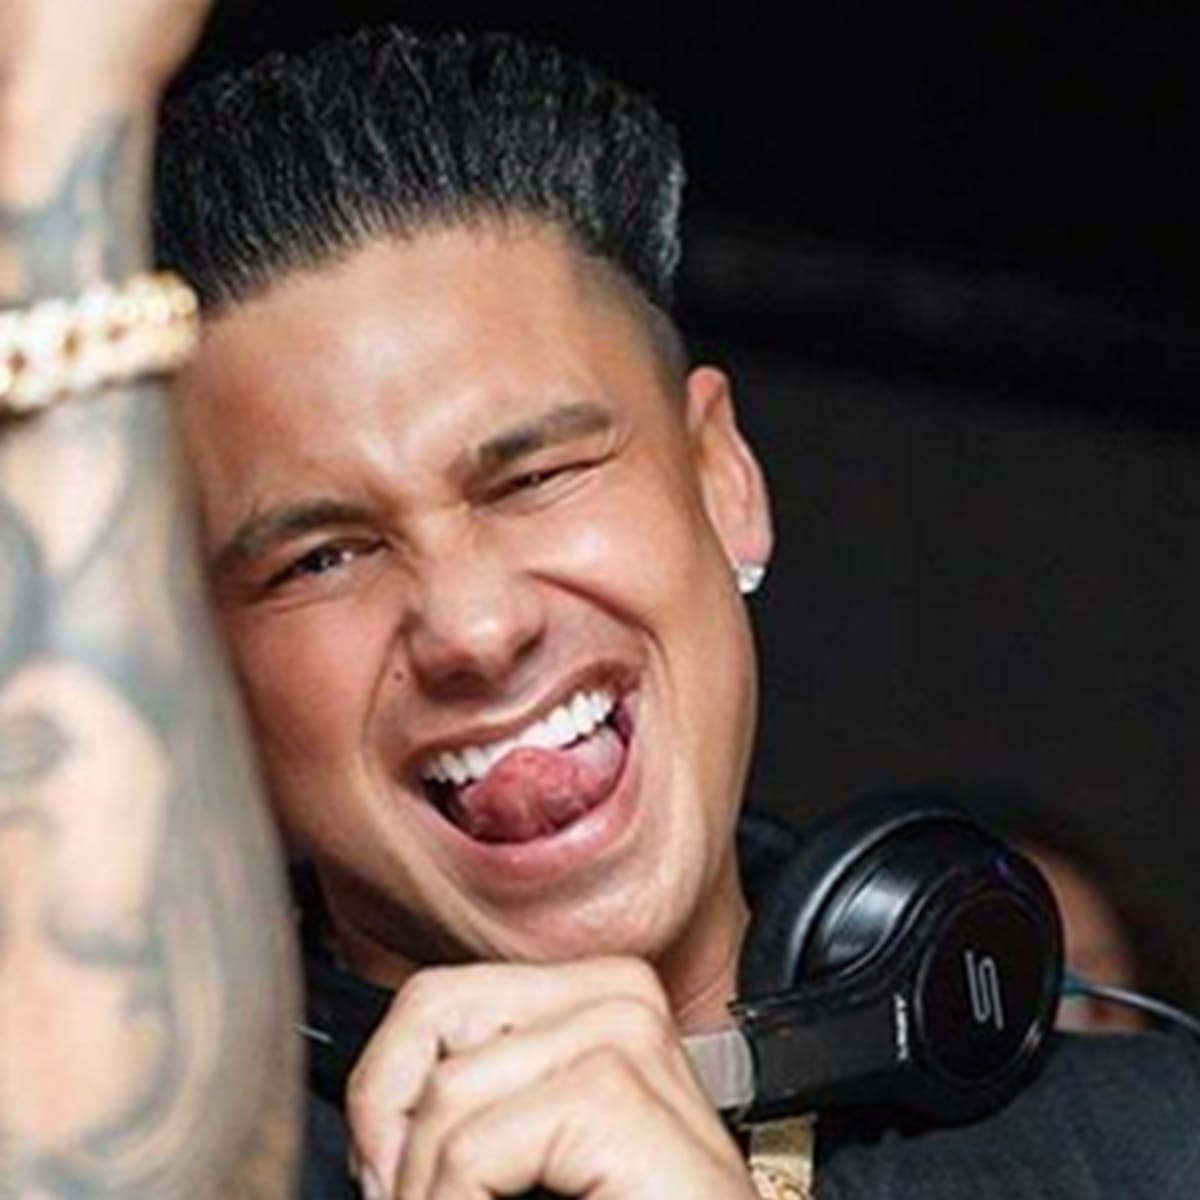 Pauly D Shown Without His Iconic Hair Gel Ideas, Artists and Models